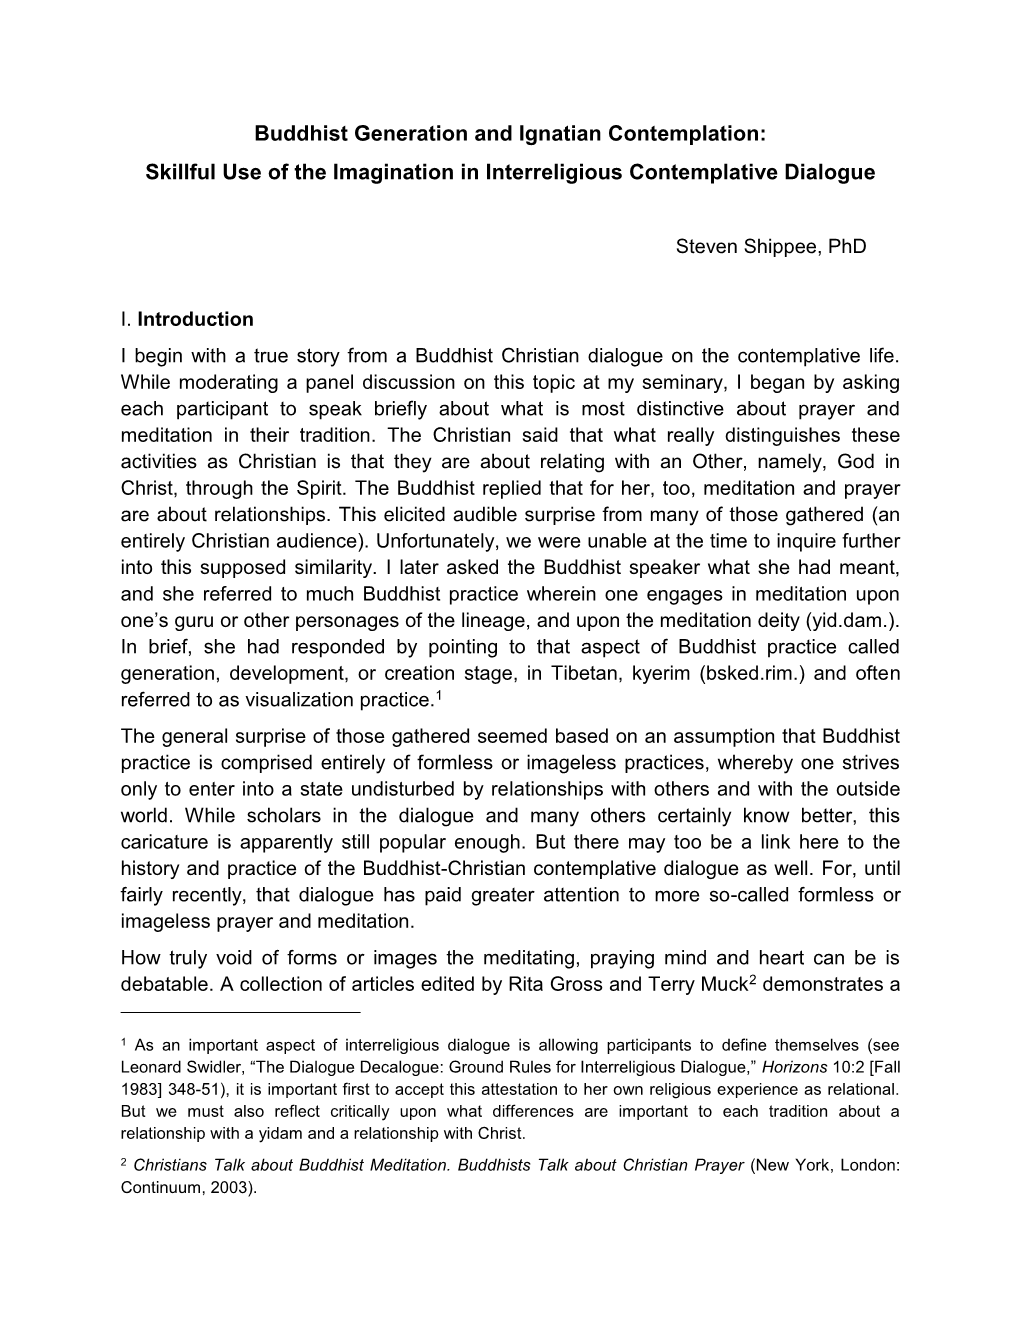 Buddhist Generation and Ignatian Contemplation: Skillful Use of the Imagination in Interreligious Contemplative Dialogue